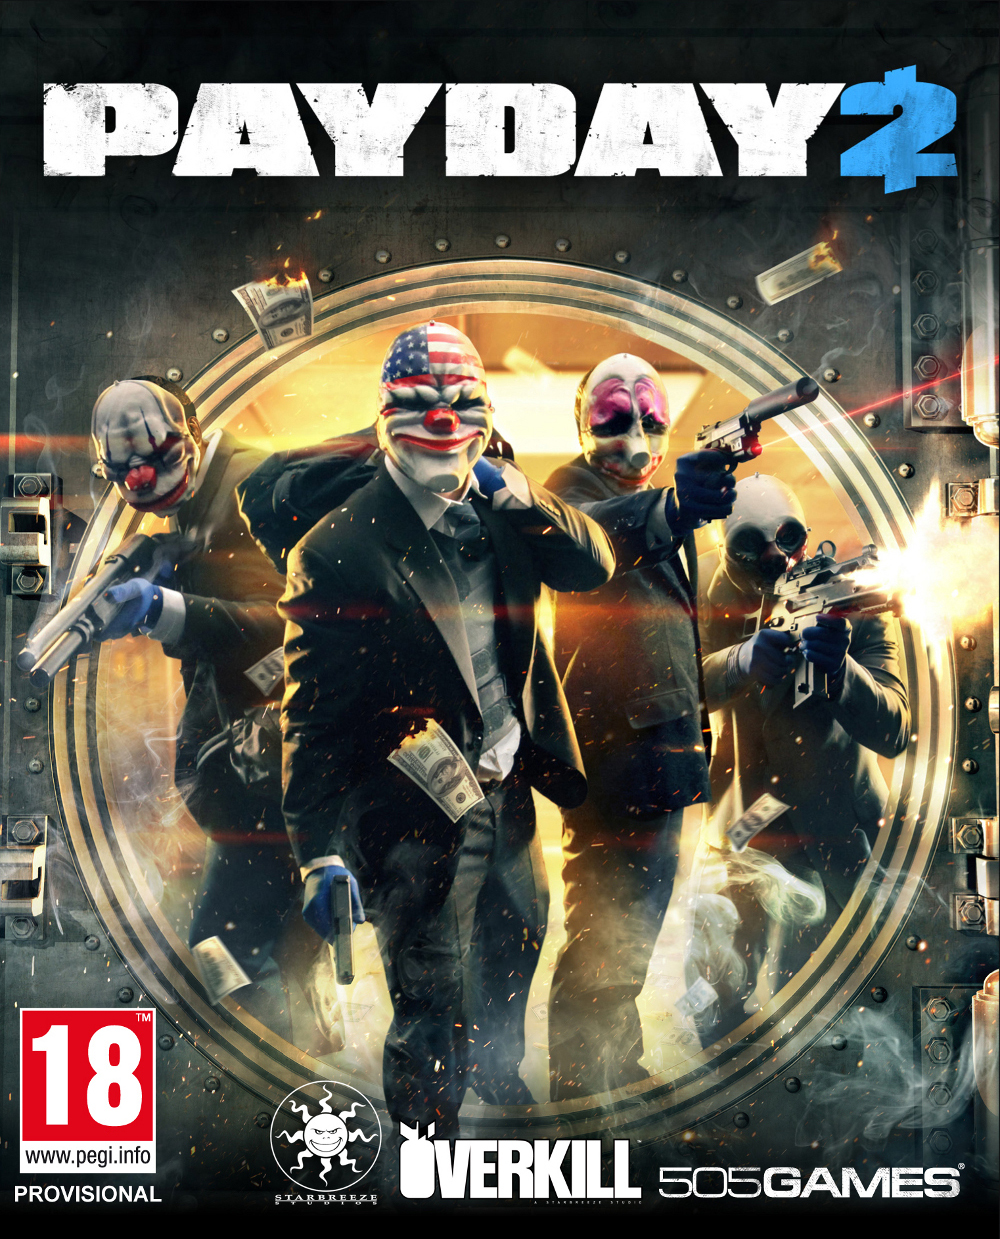 http://vignette2.wikia.nocookie.net/payday/images/9/9a/PAYDAY_2_Cover.jpg/revision/latest?cb=20130703164757